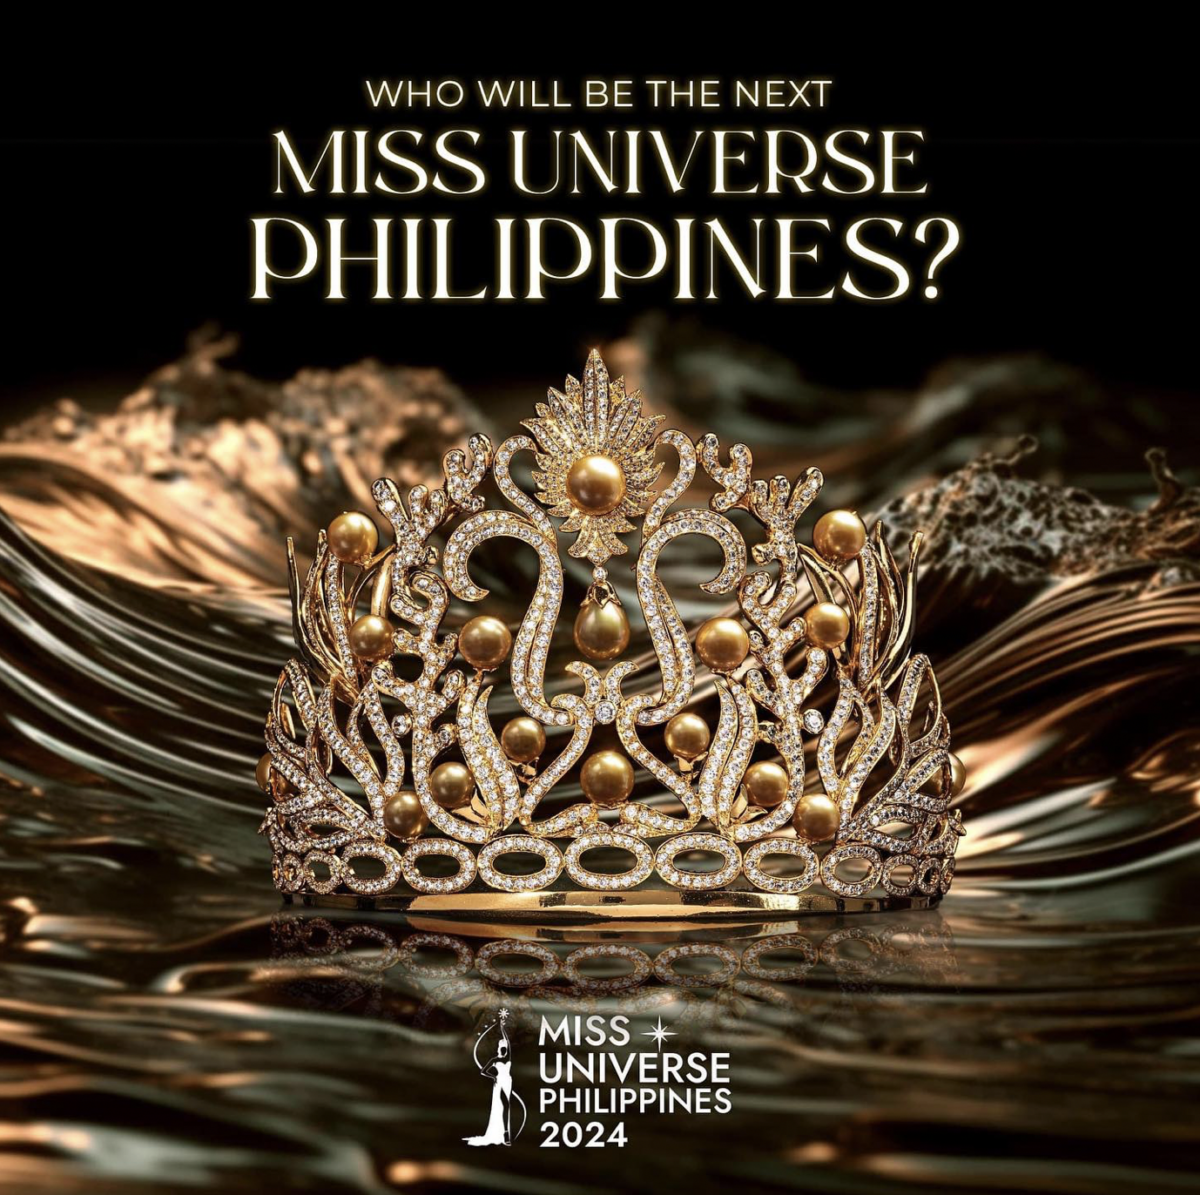 Miss Universe Philippines backs use of native dialects in 2024 tilt. Image from Instagram / @themissuniverseph